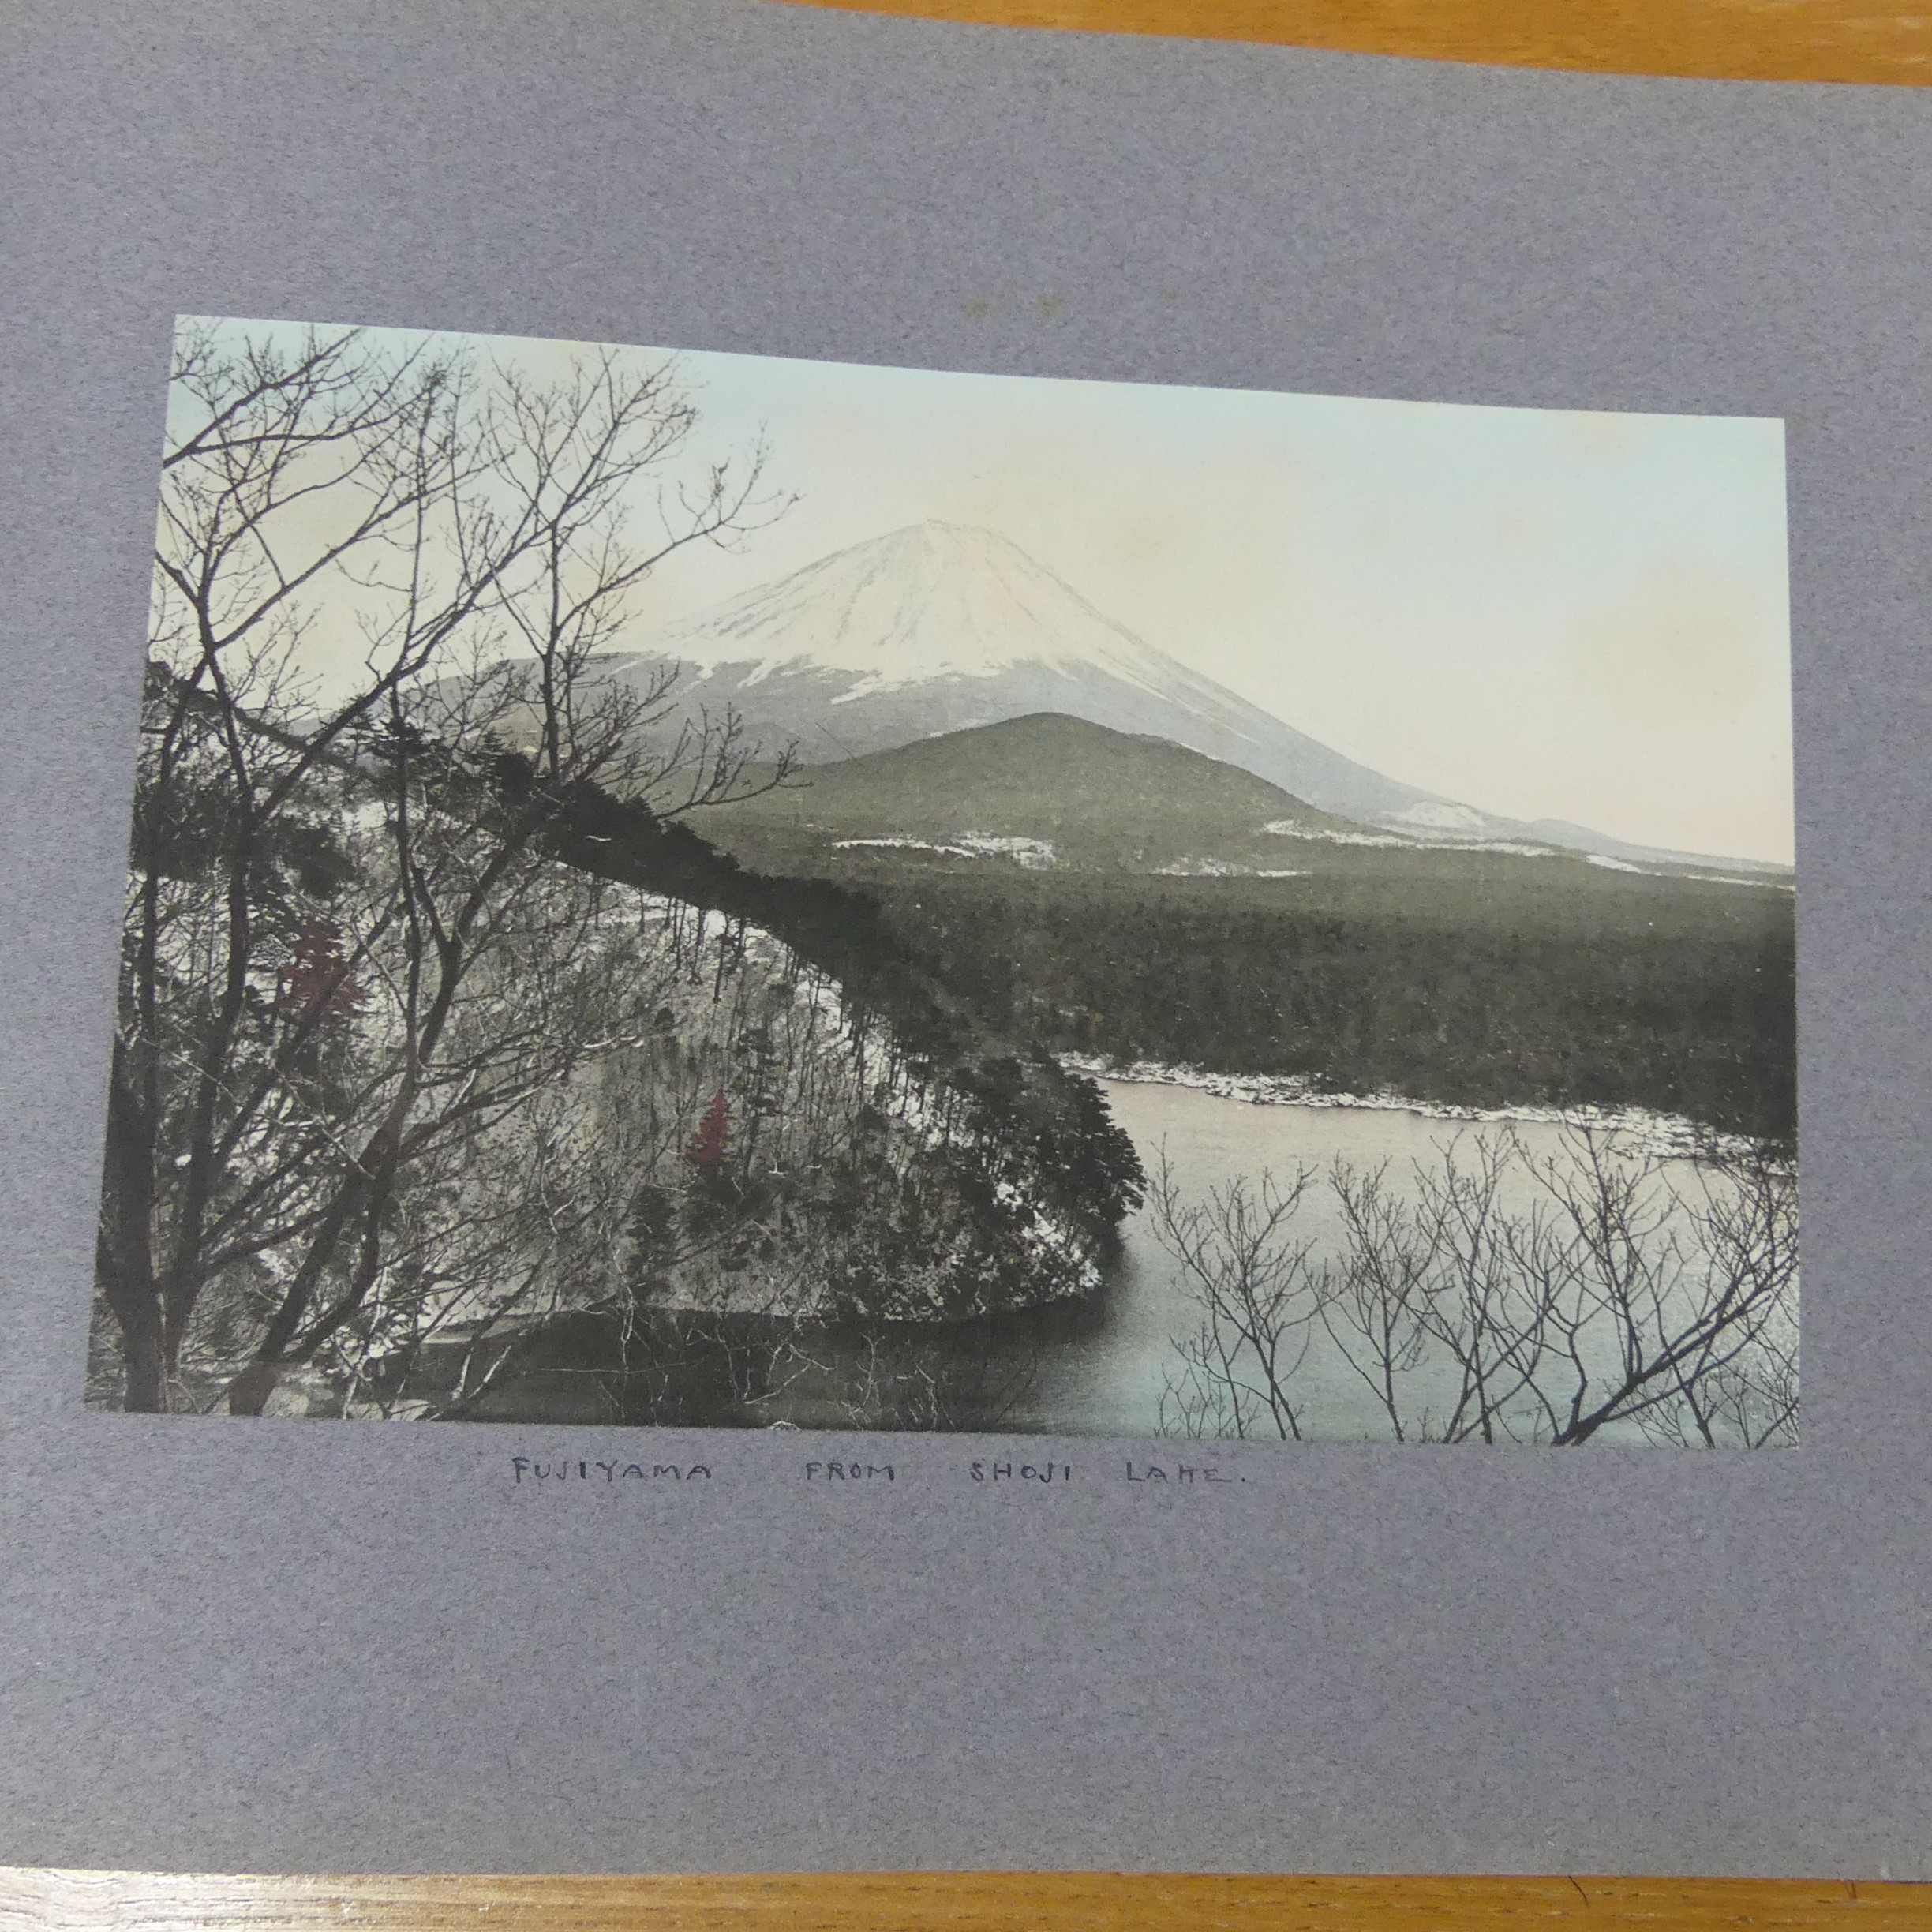 An album of early 20th century Japanese tinted photographs, depicting places, rural scenes, - Image 4 of 7